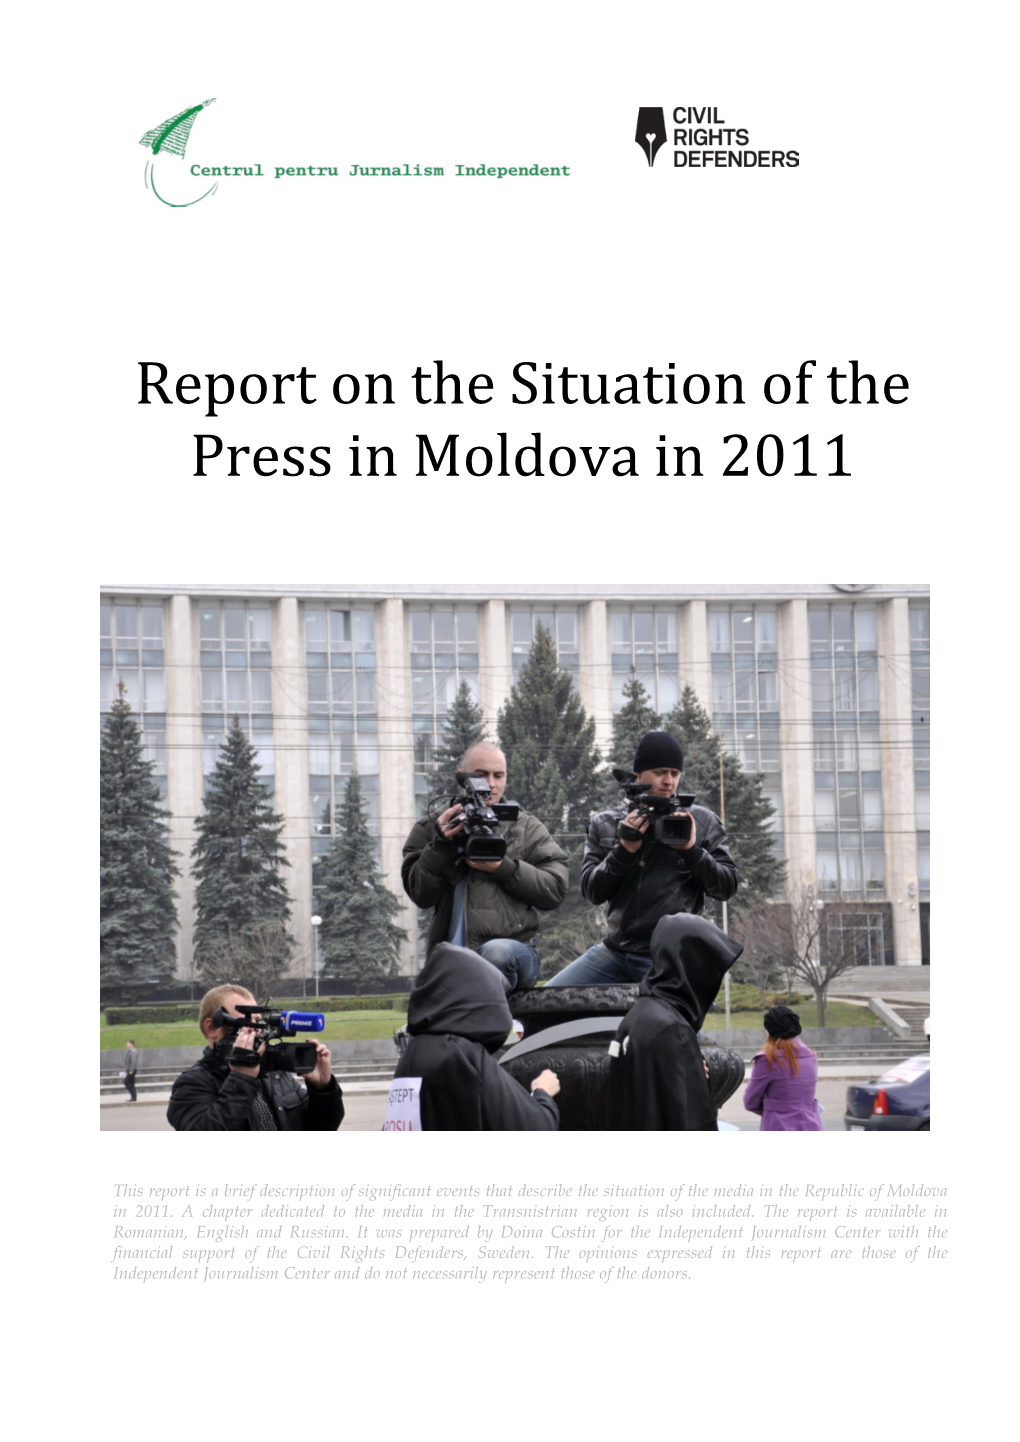 Report on the Situation of the Press in Moldova in 2011